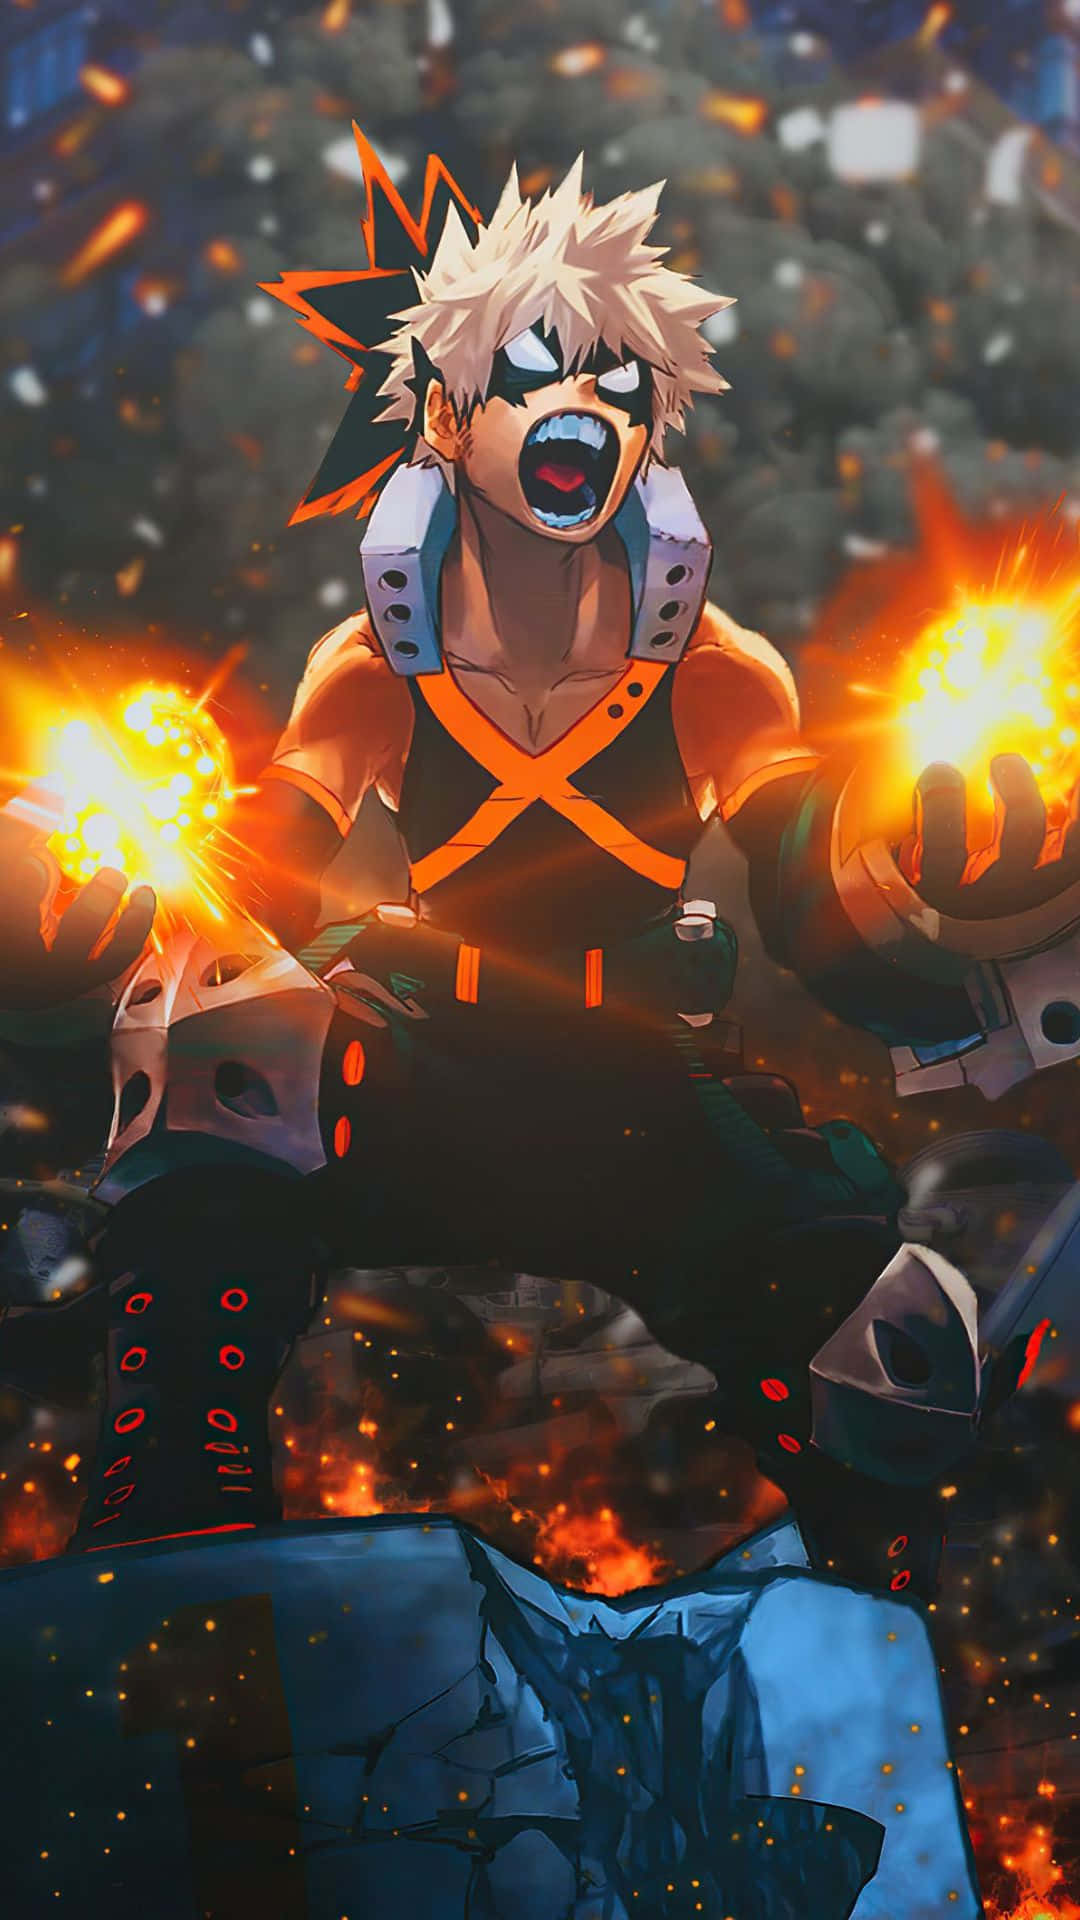 Get The Most Out Of Your Phone With The Bakugo Phone Wallpaper